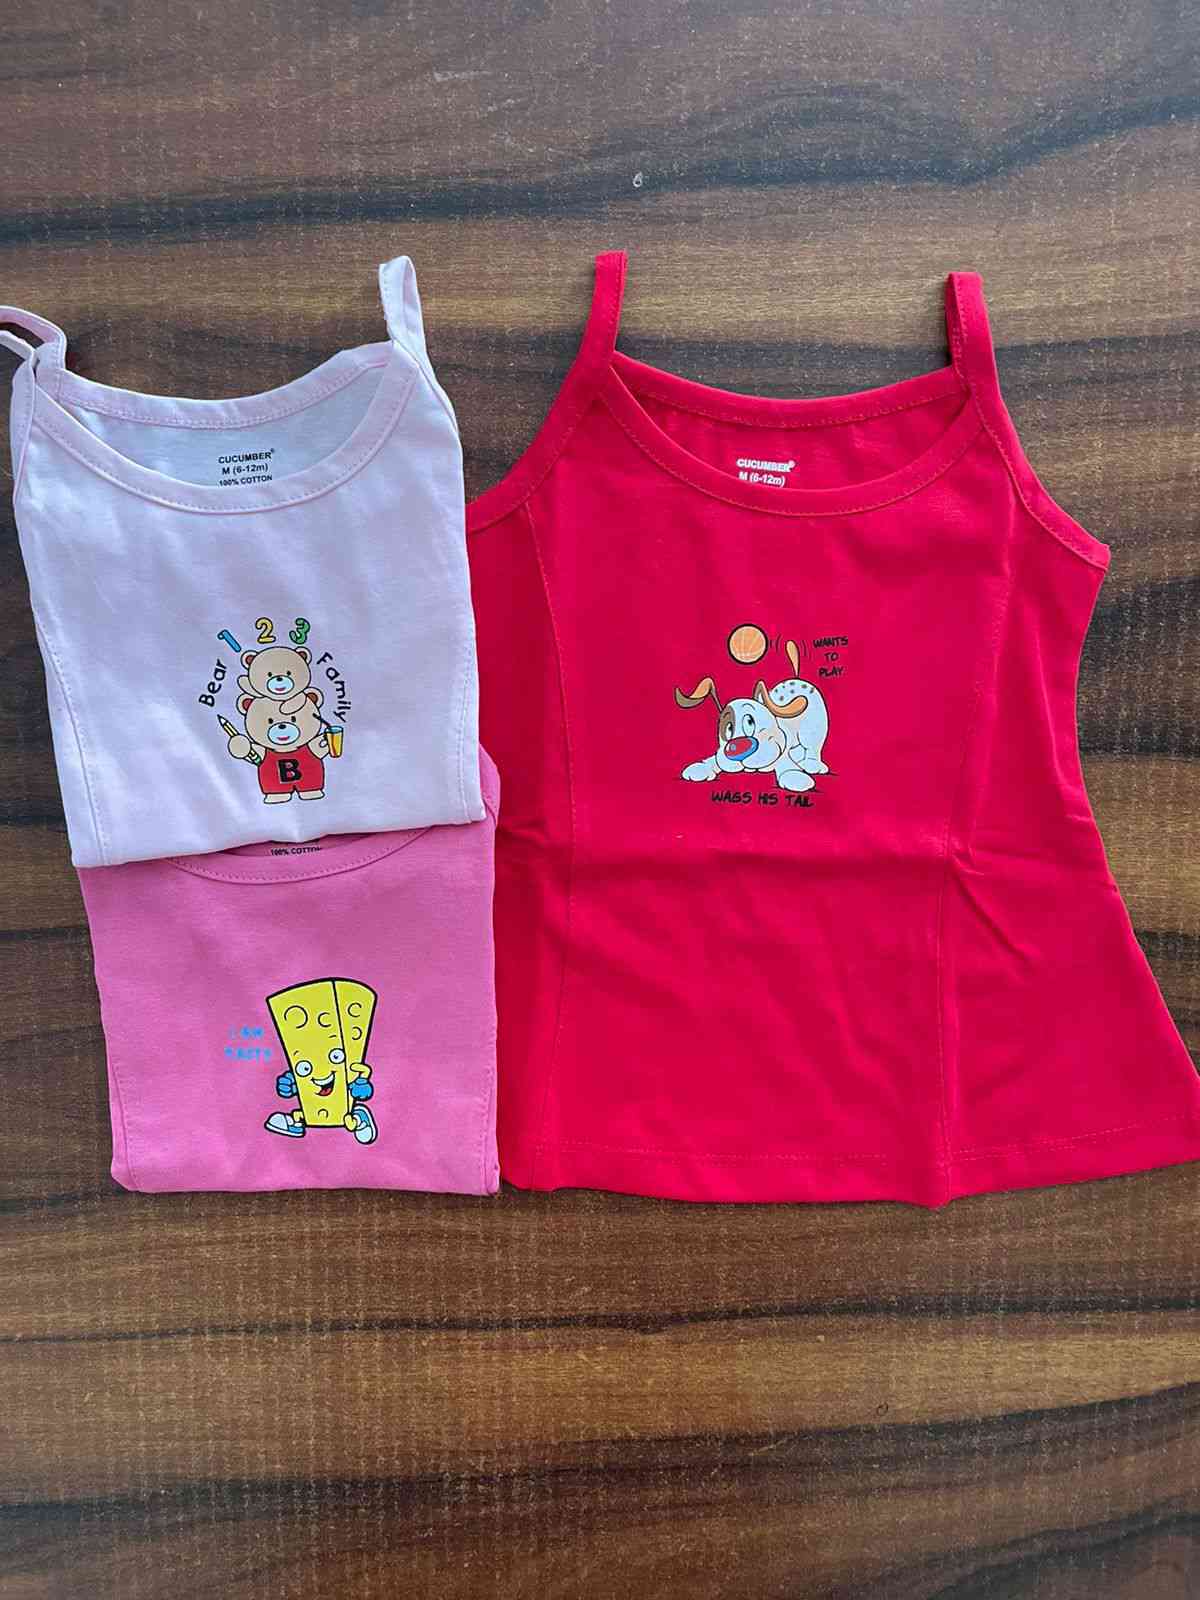 Cucumber Girls Inners  Vests  6 to 12 Months Till 18 to 24 Months   Pack of 3